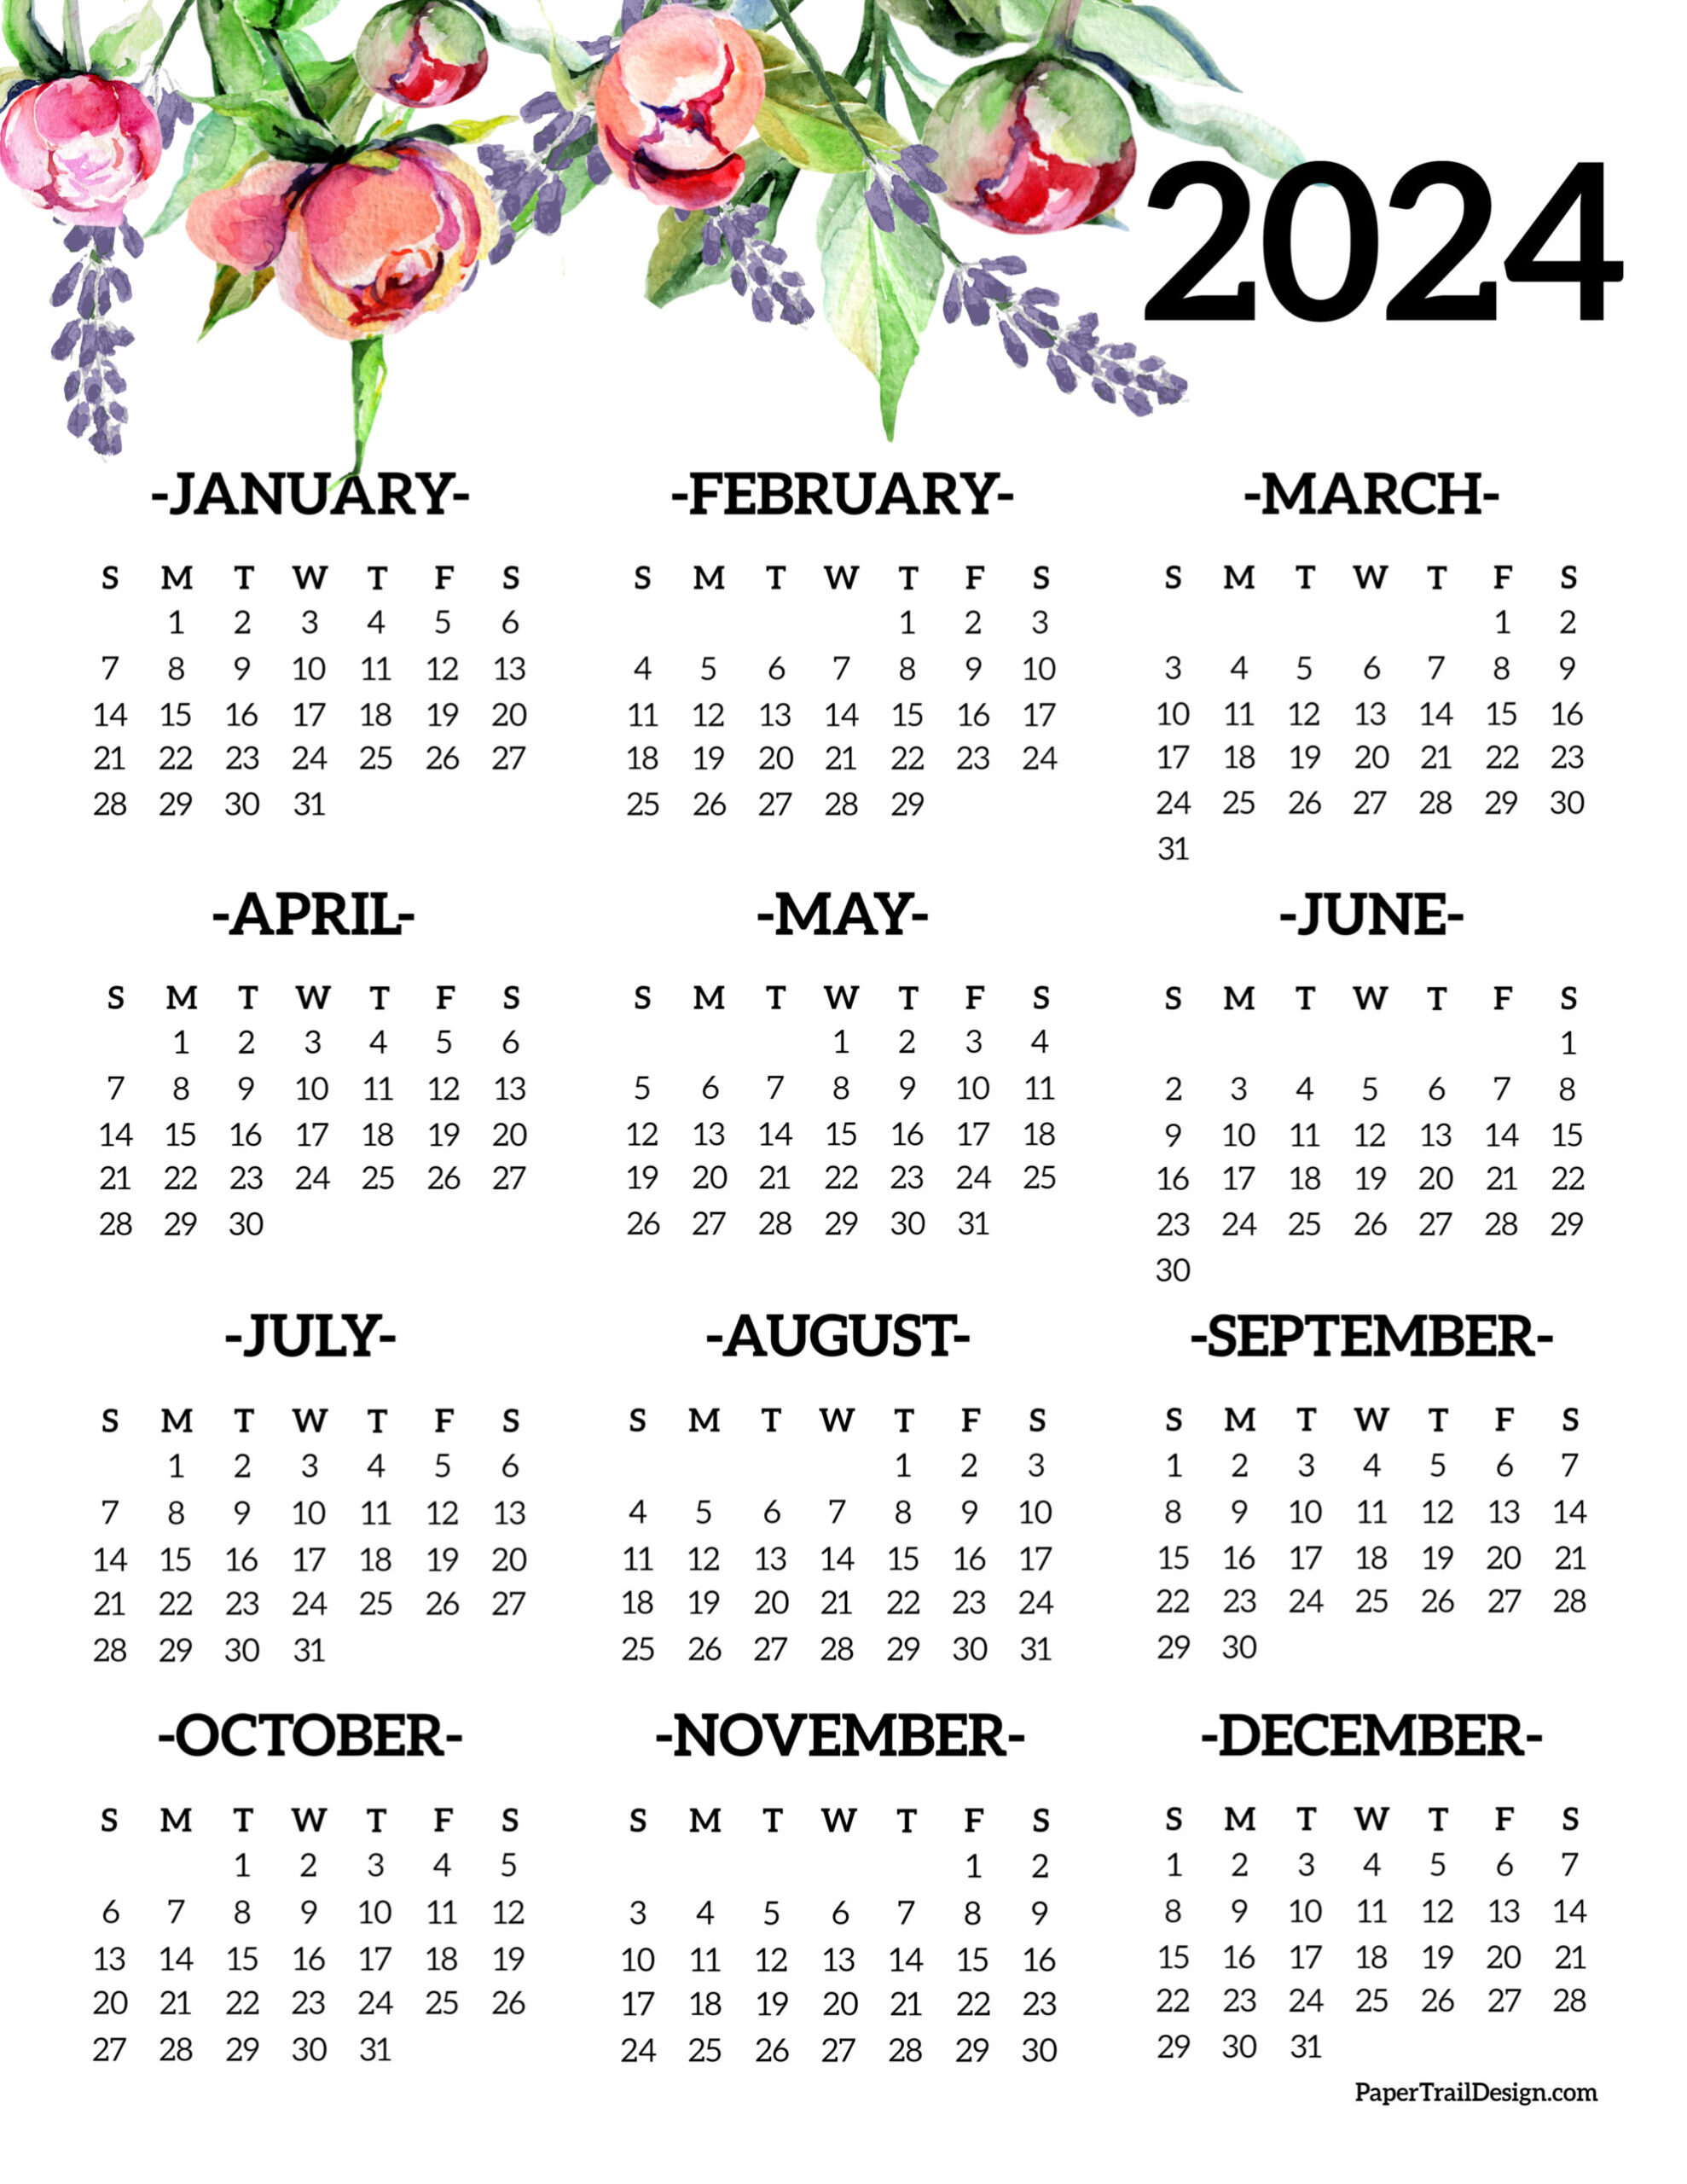 Calendar 2024 Printable One Page - Paper Trail Design for Printable Yearly Calendar 2024 One Page